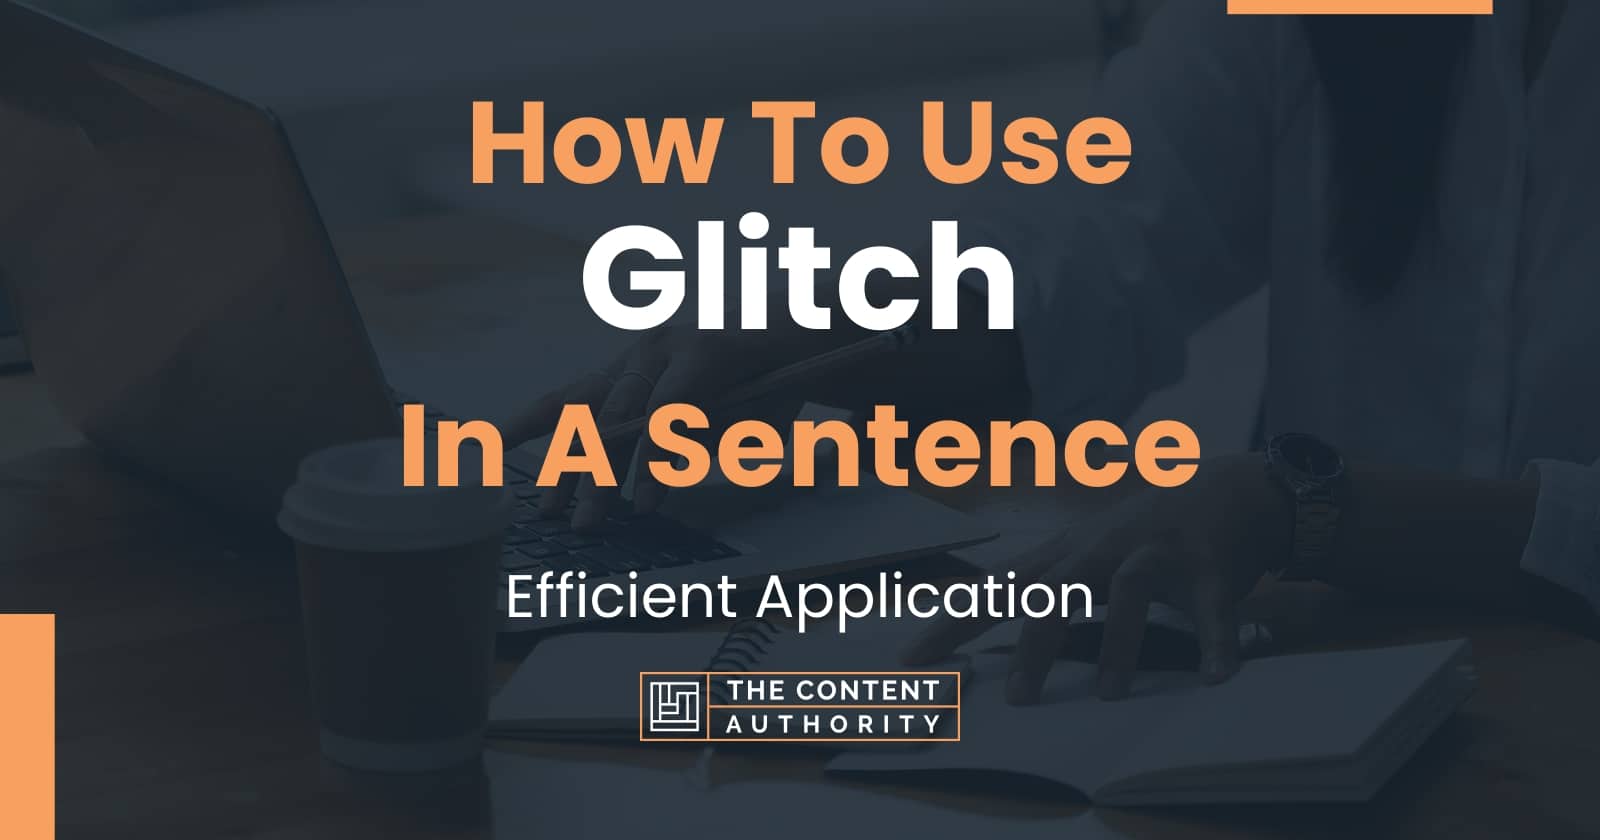 Glitch - Definition, Meaning & Synonyms